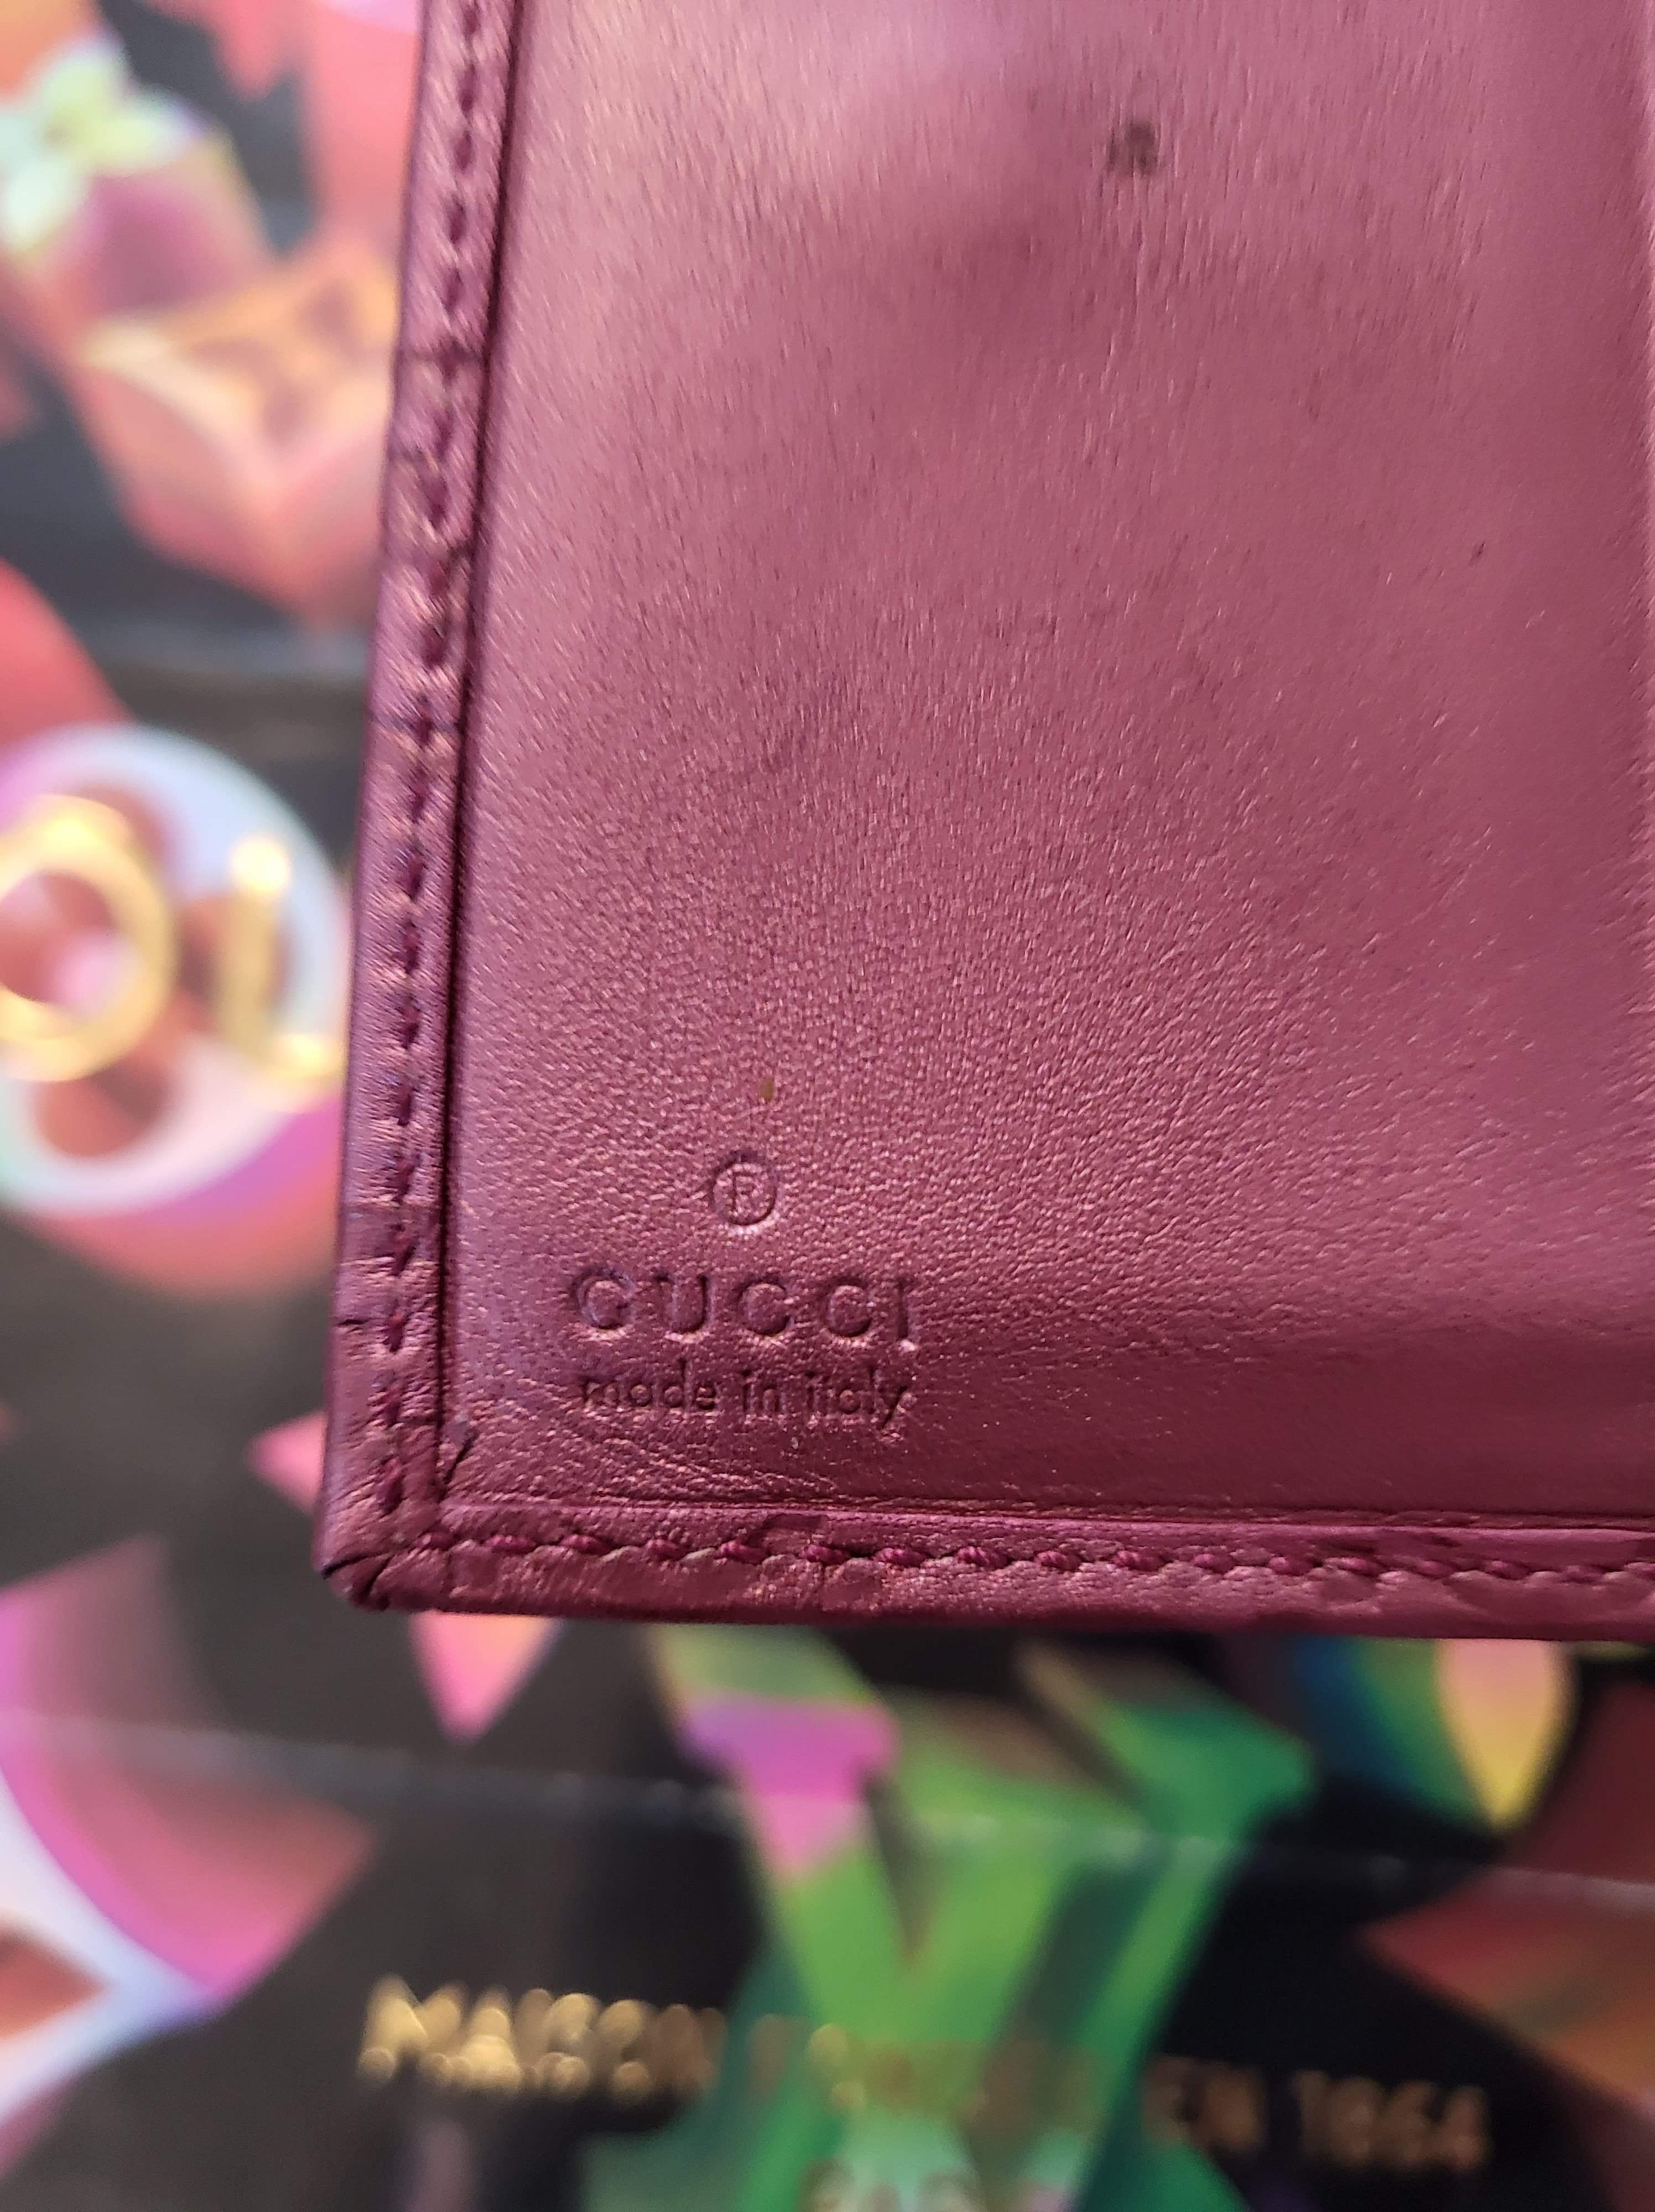 AUTHENTIC GUCCI WALLET